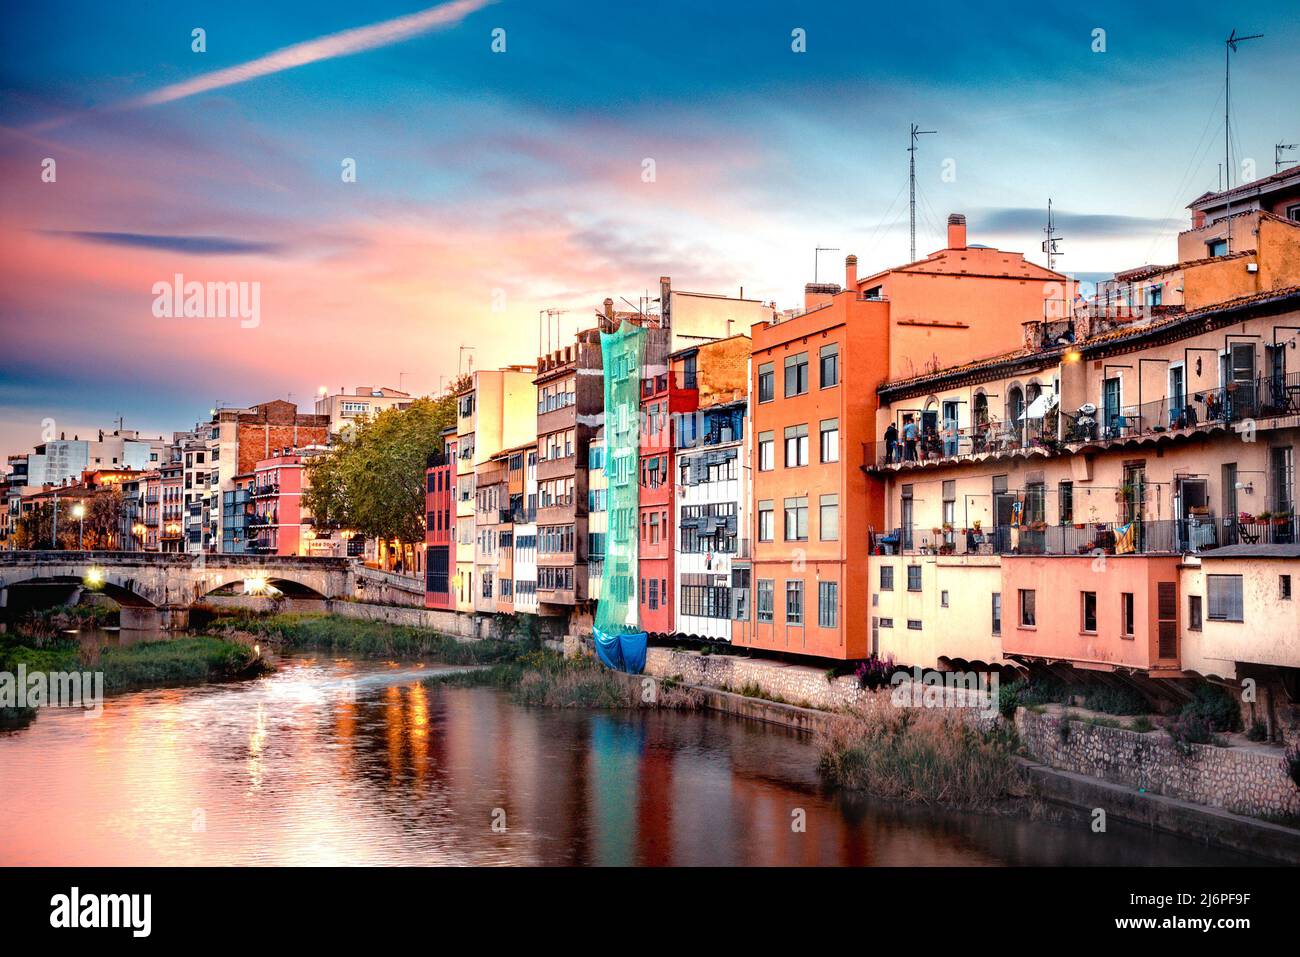 Girona Spain with canal and historic colorful buildings seen at sunset. Stock Photo